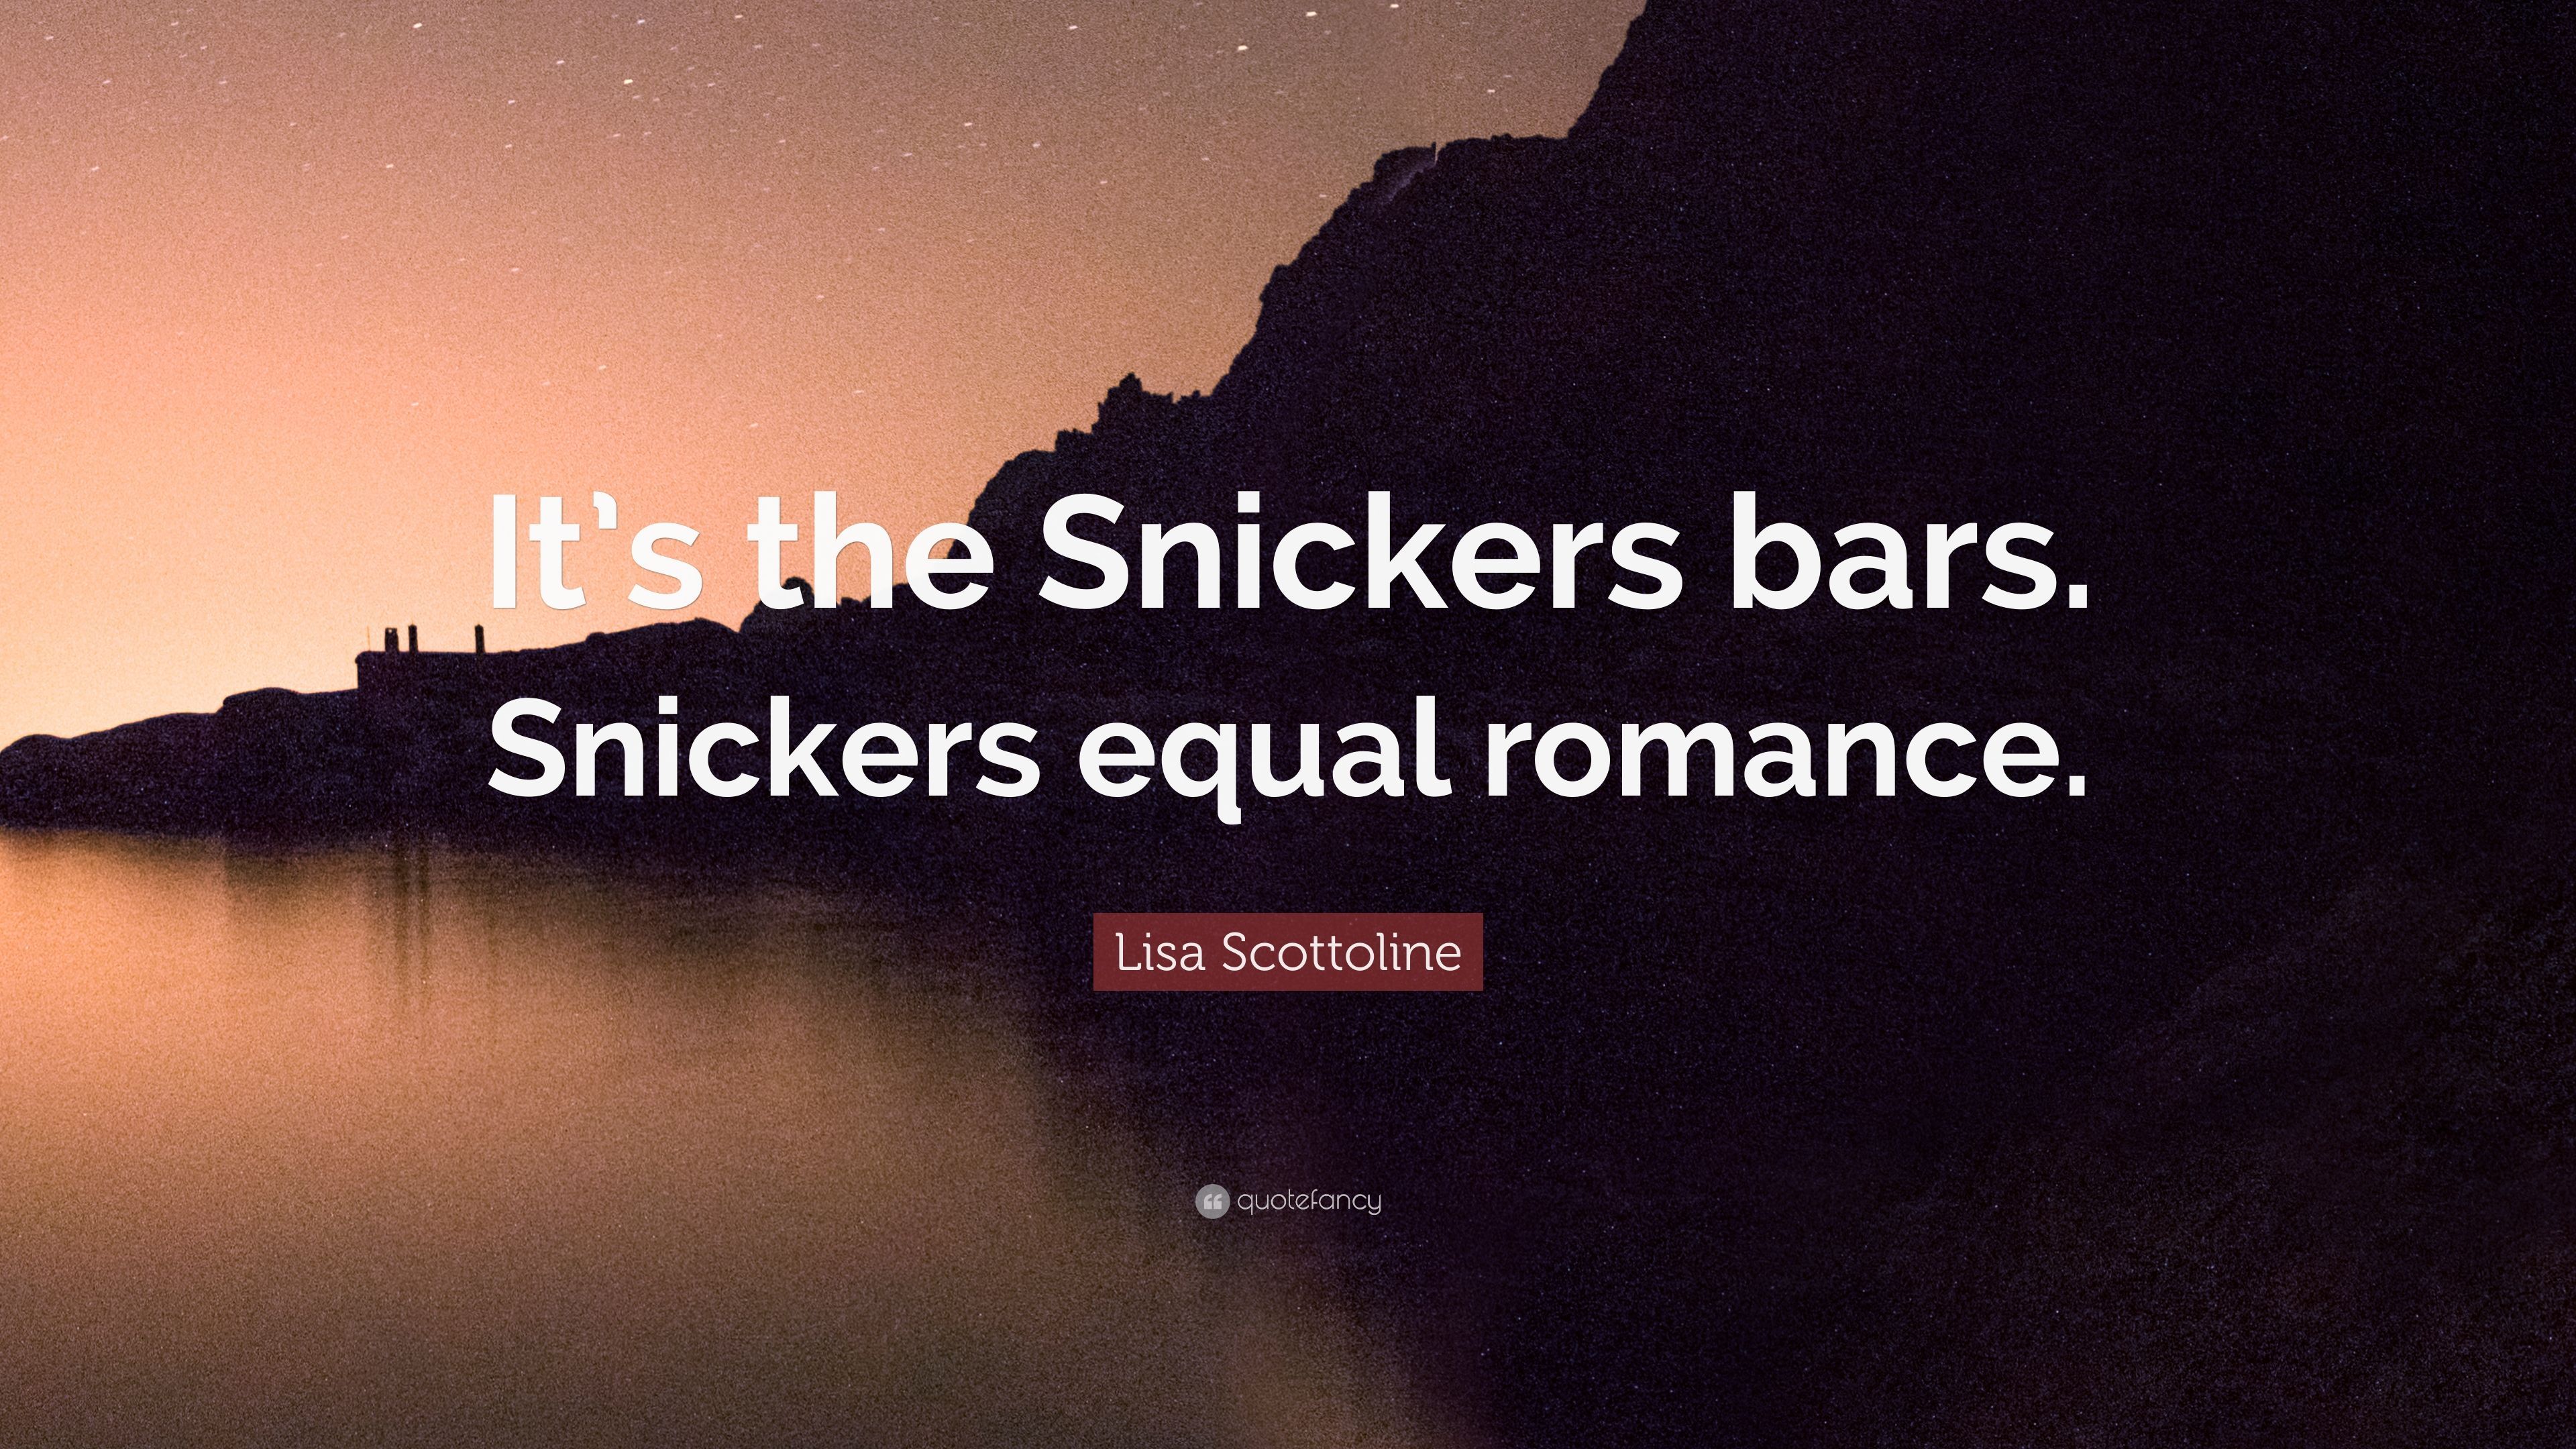 Lisa Scottoline Quote: “It's the Snickers bars. Snickers equal